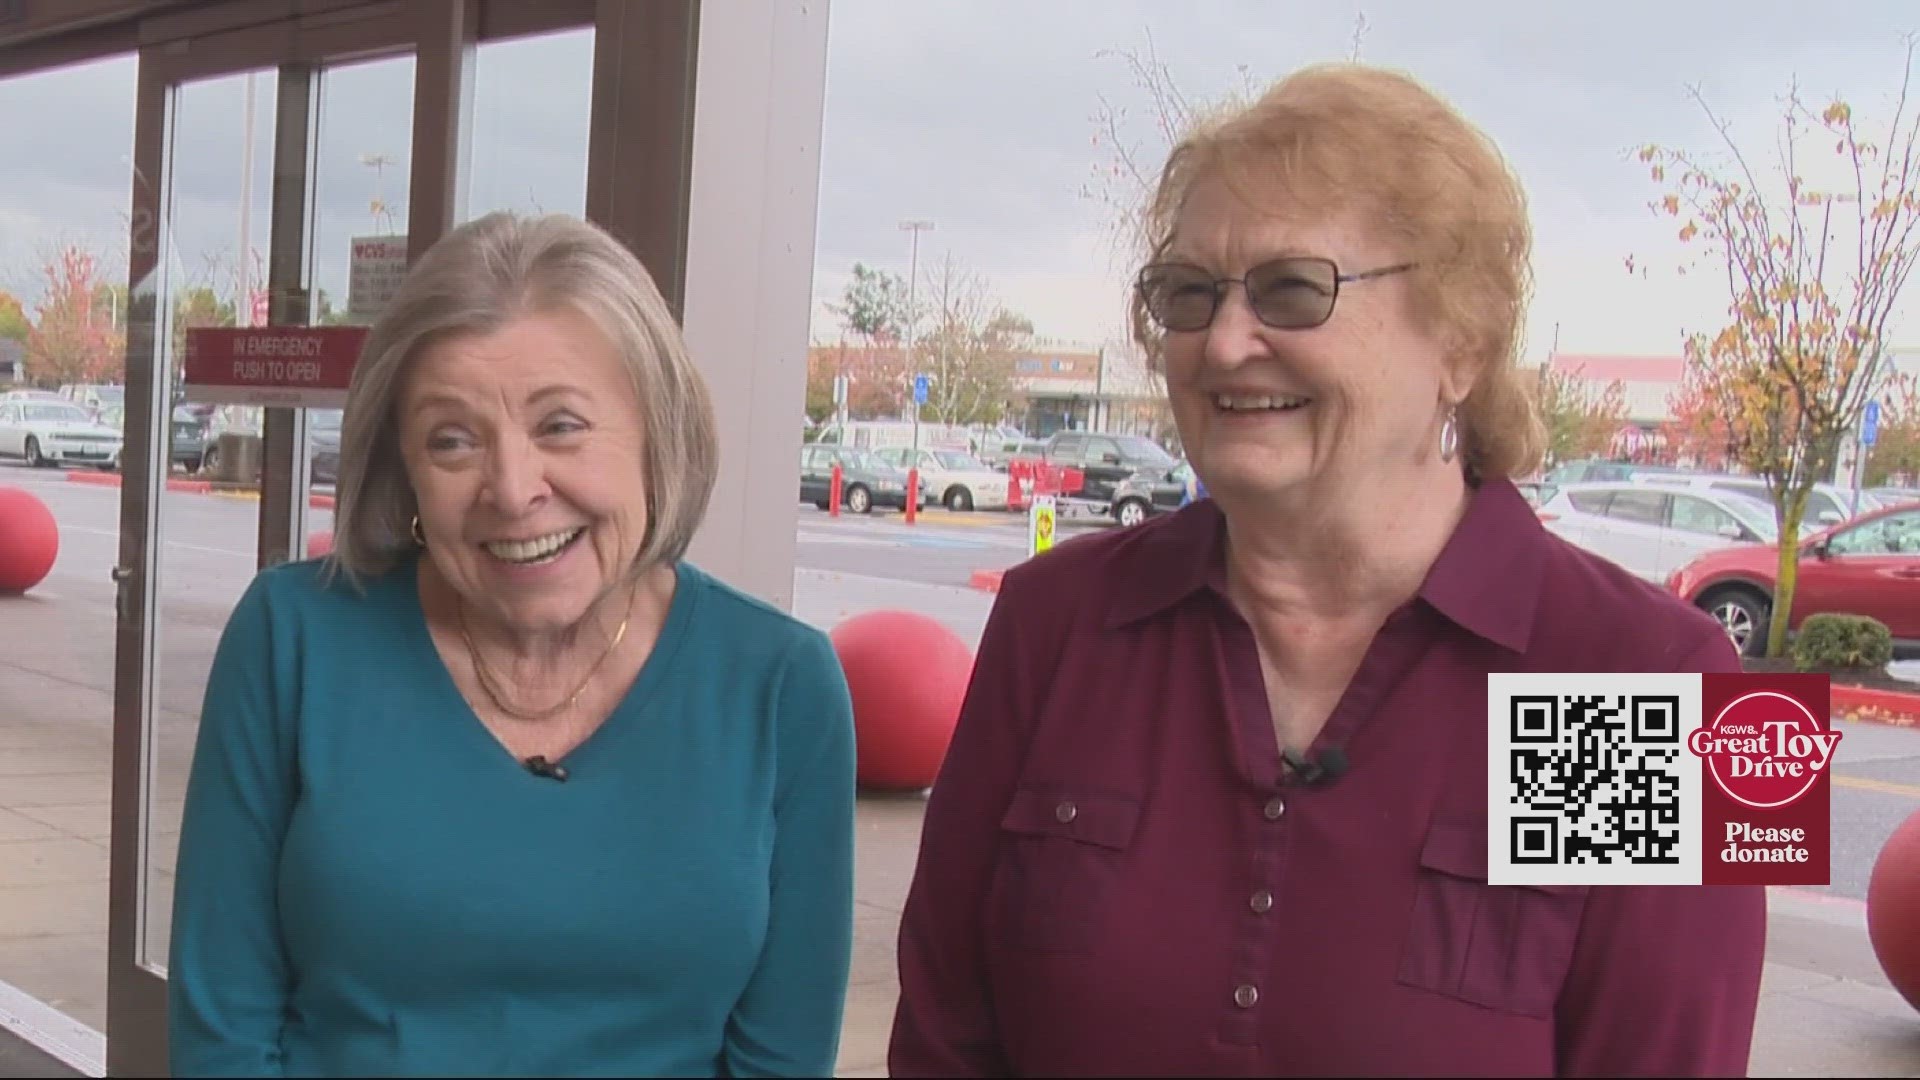 Two Washington grandmothers, Beth Johnson-Berger and Nancy Brown make it their mission to donate lots of toys to the KGW Great Toy Drive every year.